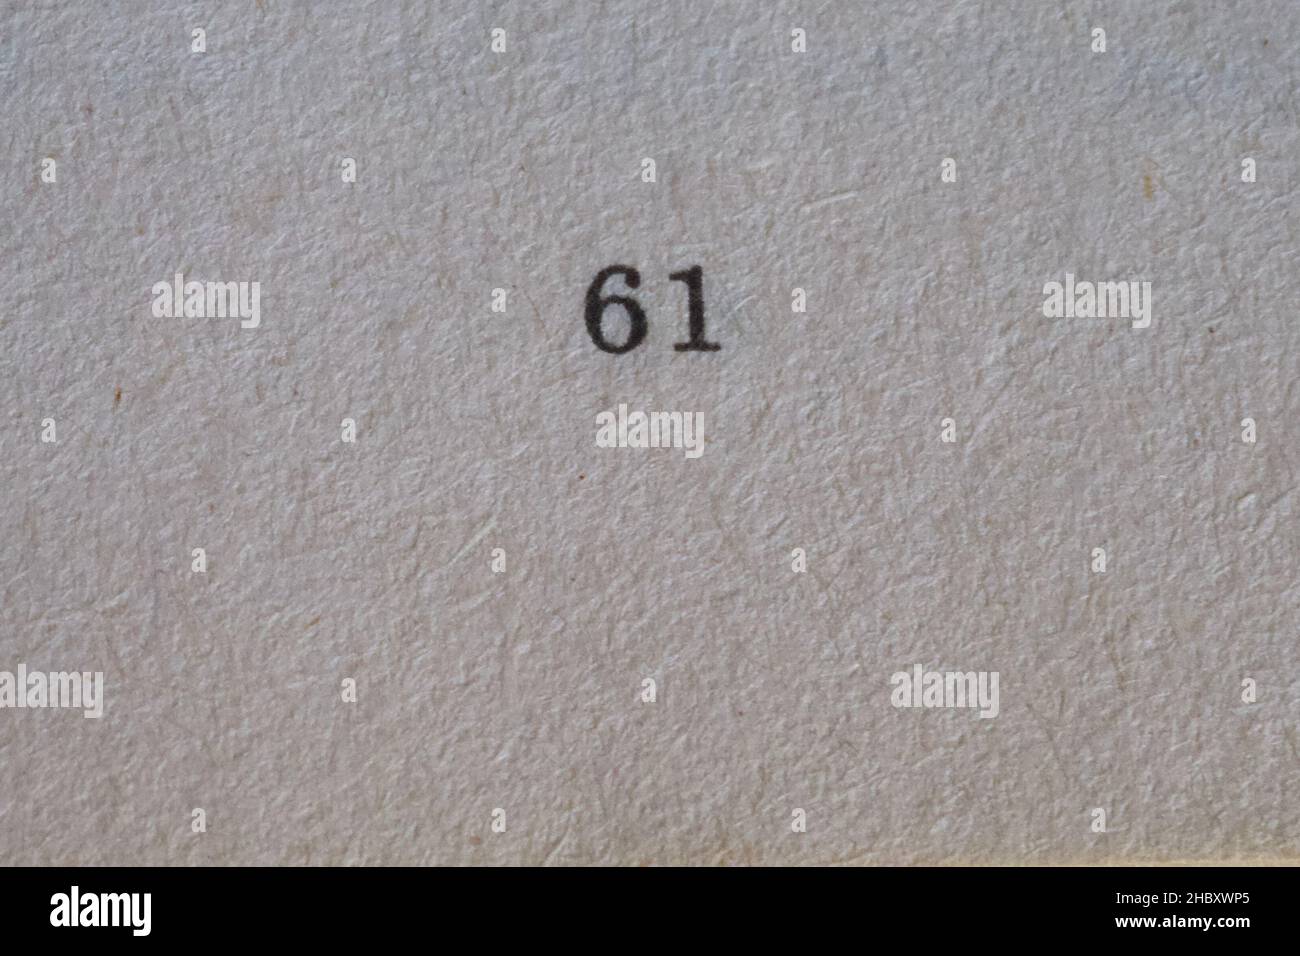 The number 61 printed on a piece of paper. Paper texture. Stock Photo